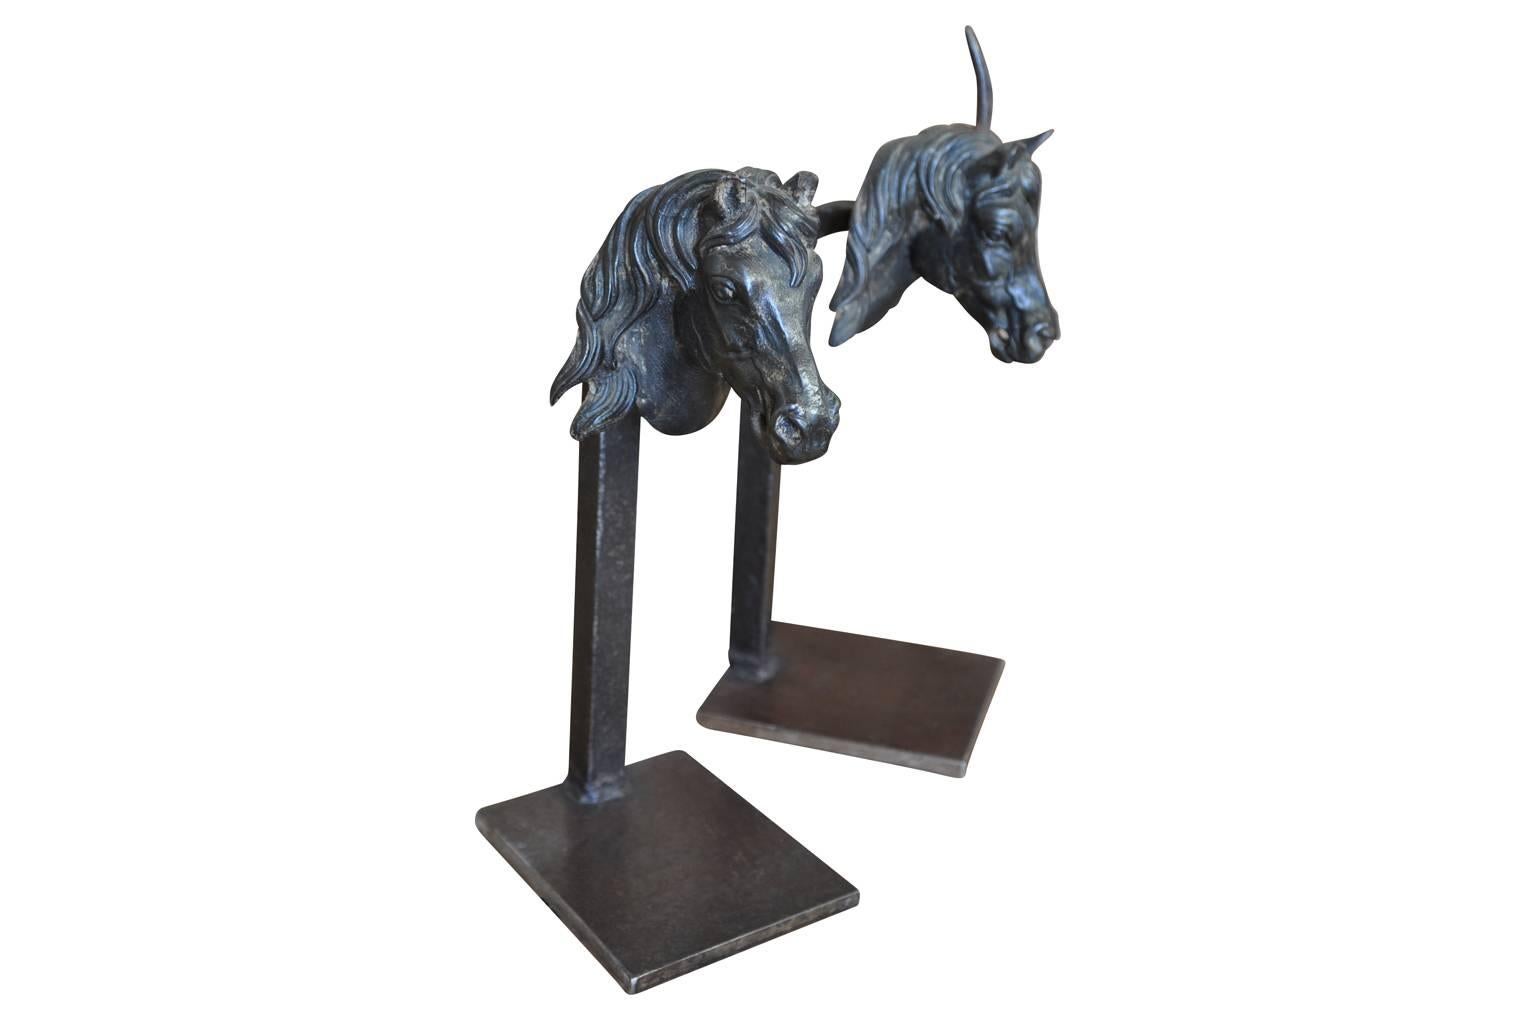 A very handsome pair of French early 19th century Serre-Livres or bookends. Crafted with beautifully casted Unicorn heads in iron. Later converted into bookends.